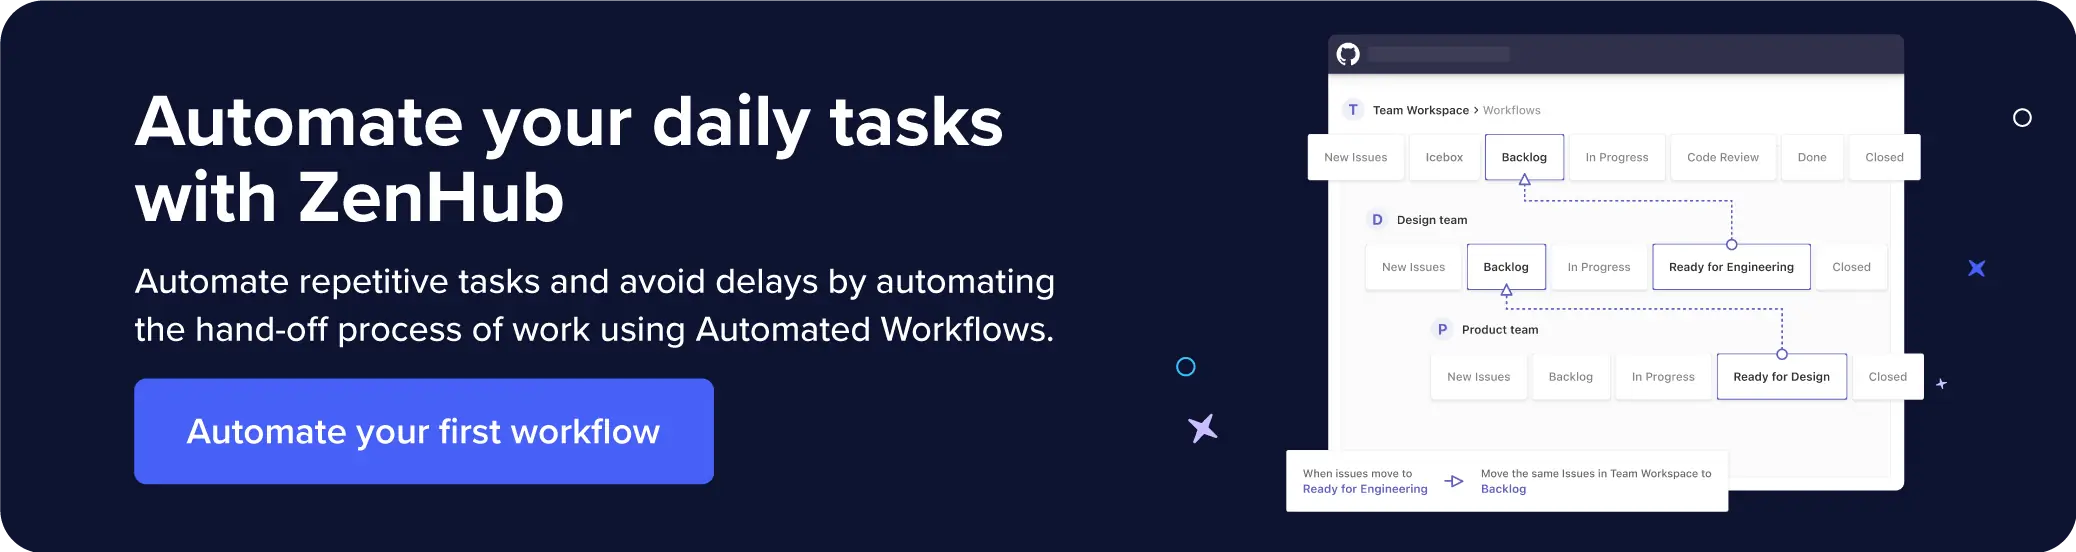 Recommends automating repetitive tasks and avoiding delays in the hand-off process of work through ZenHub.